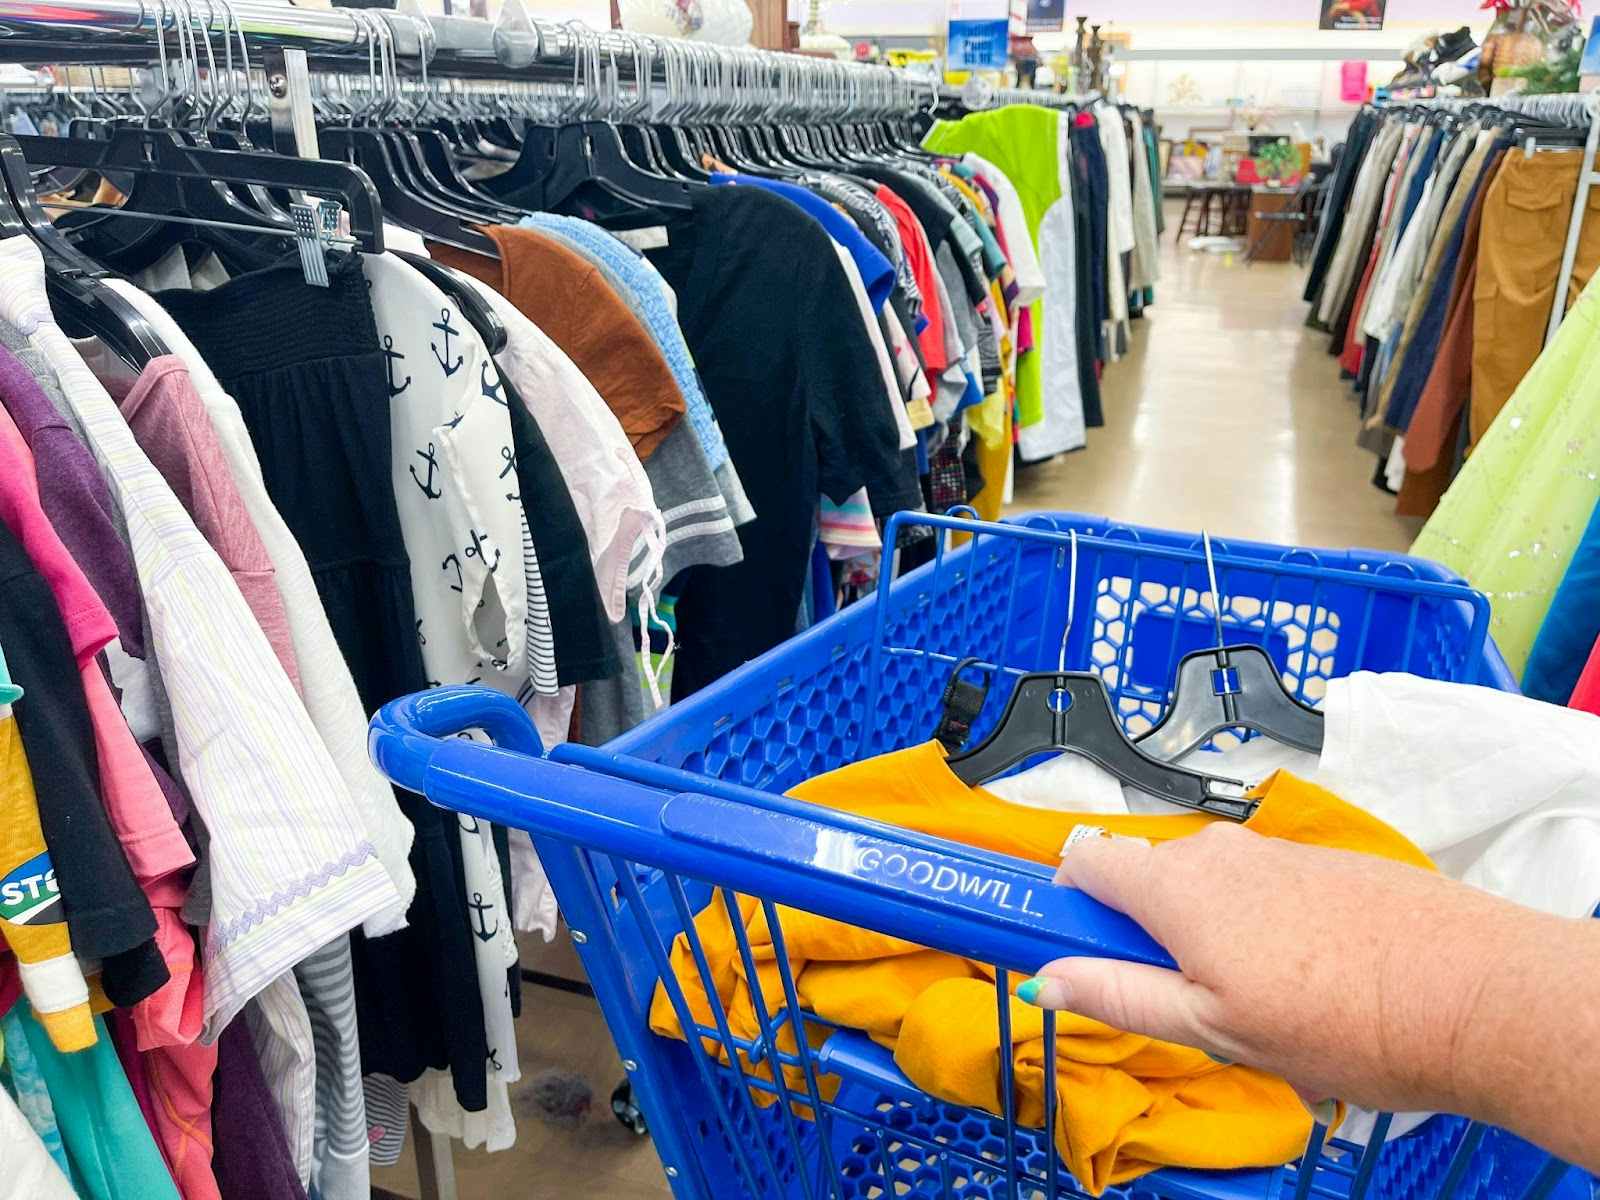 A person with their hand on a shopping cart in a clothing aisle of a goodwill store.